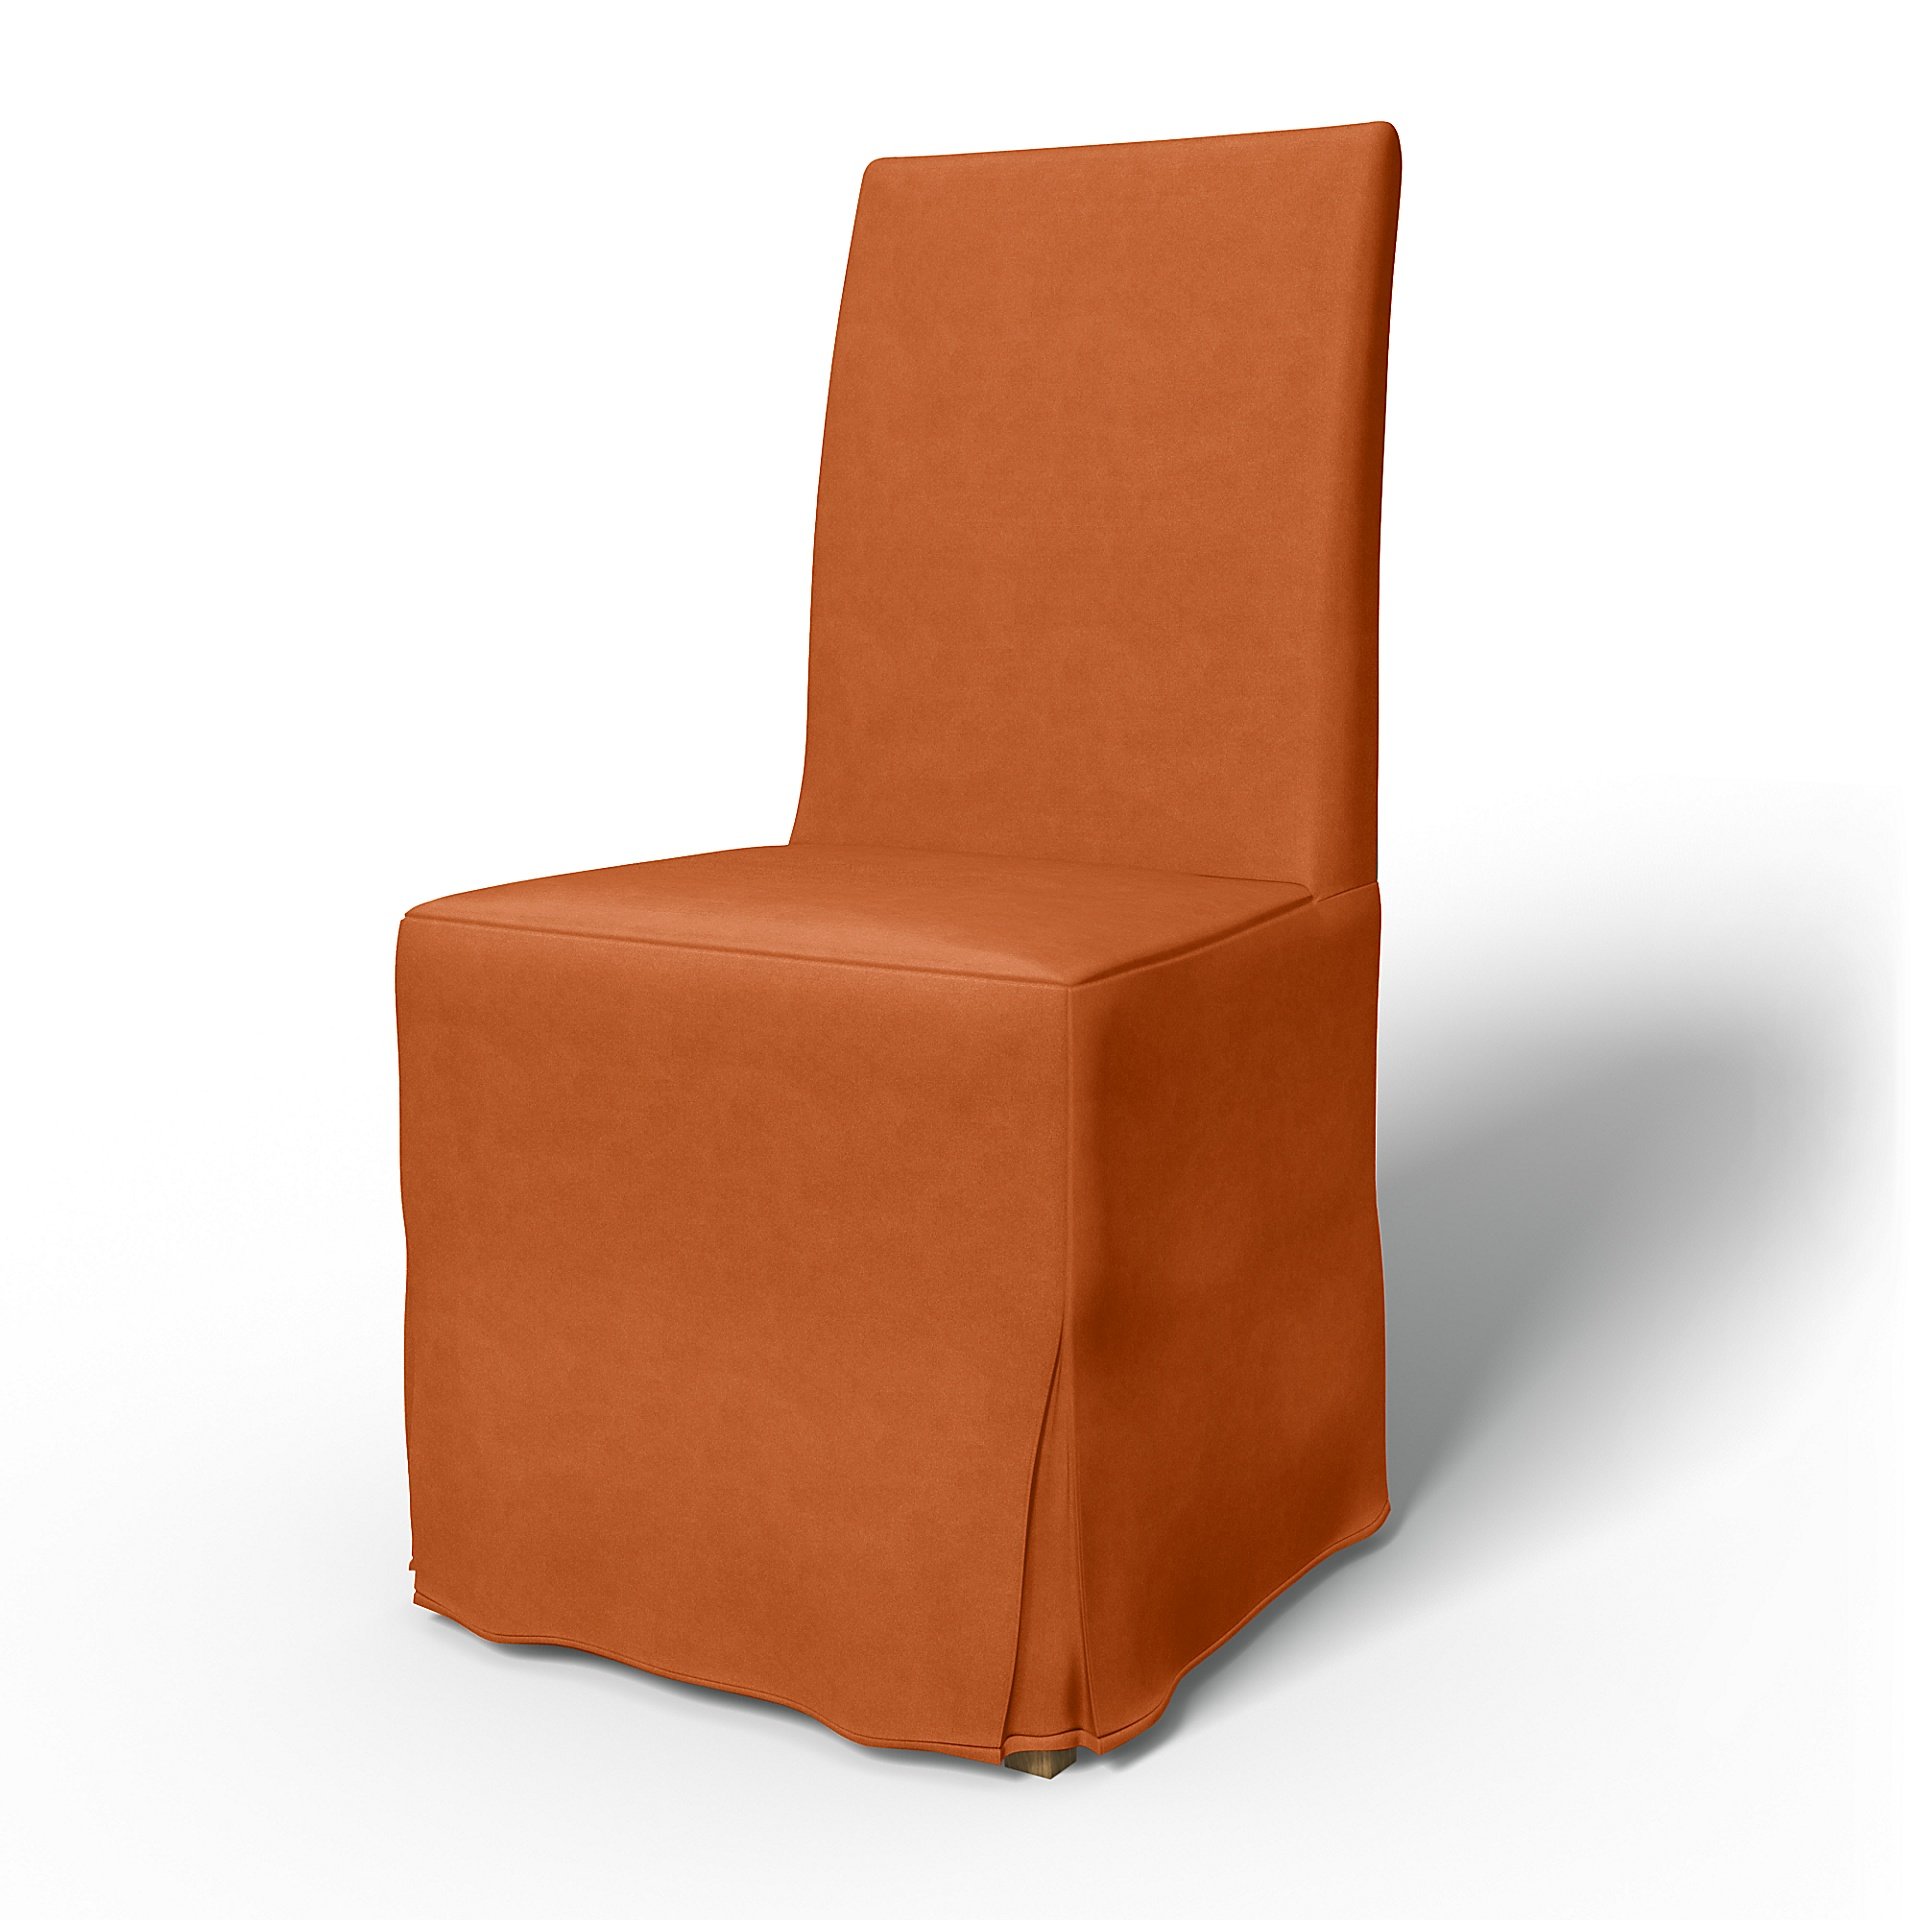 IKEA - Henriksdal Dining Chair Cover Long Skirt with Box Pleat (Standard model), Rust, Outdoor - Bem